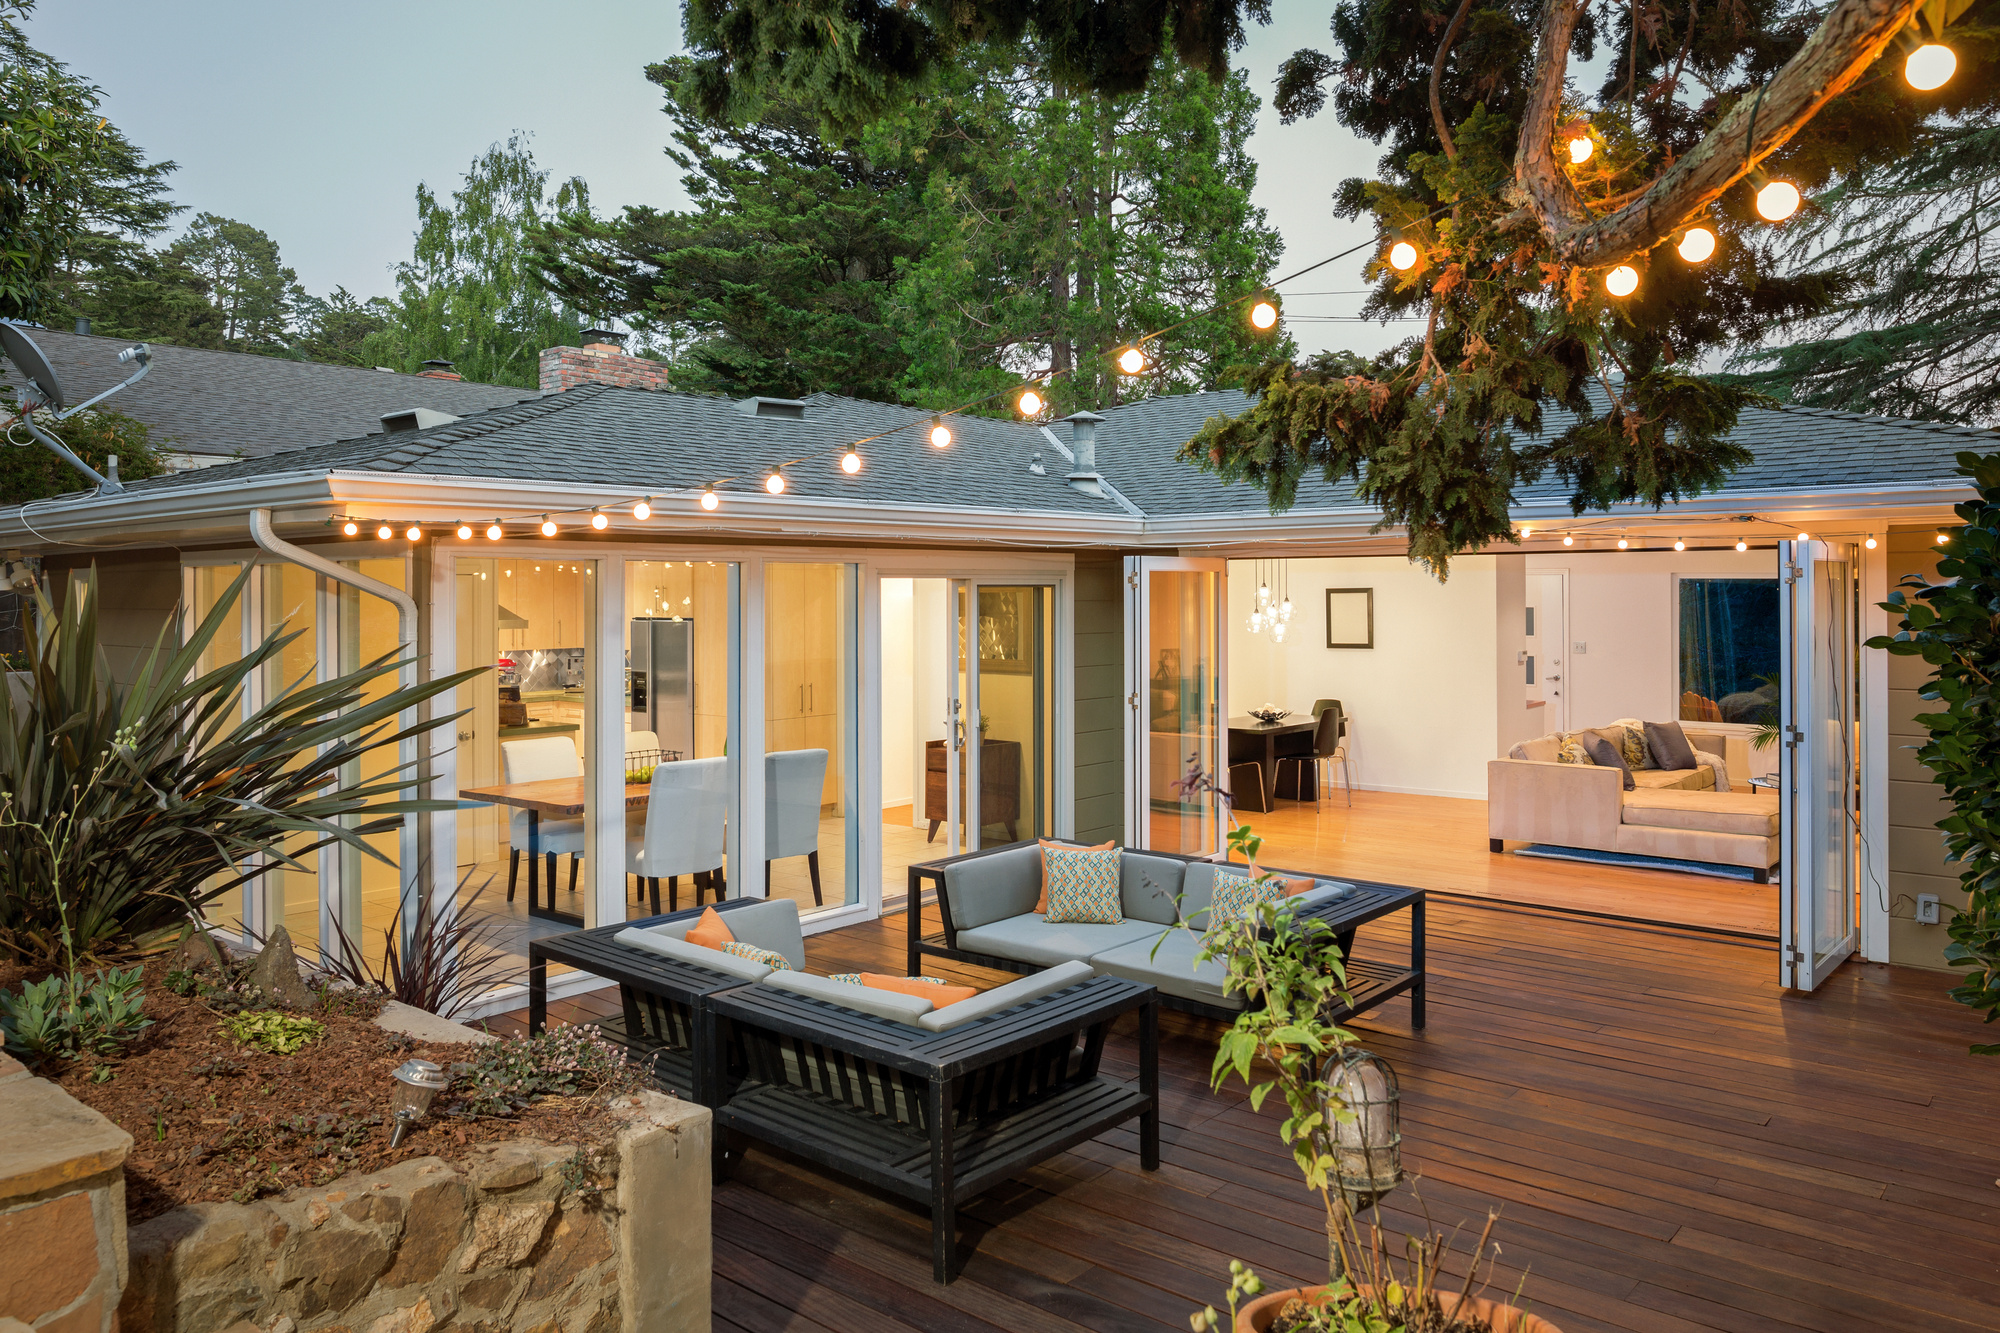 The Complete Guide to Choosing Outdoor Lighting for Homeowners